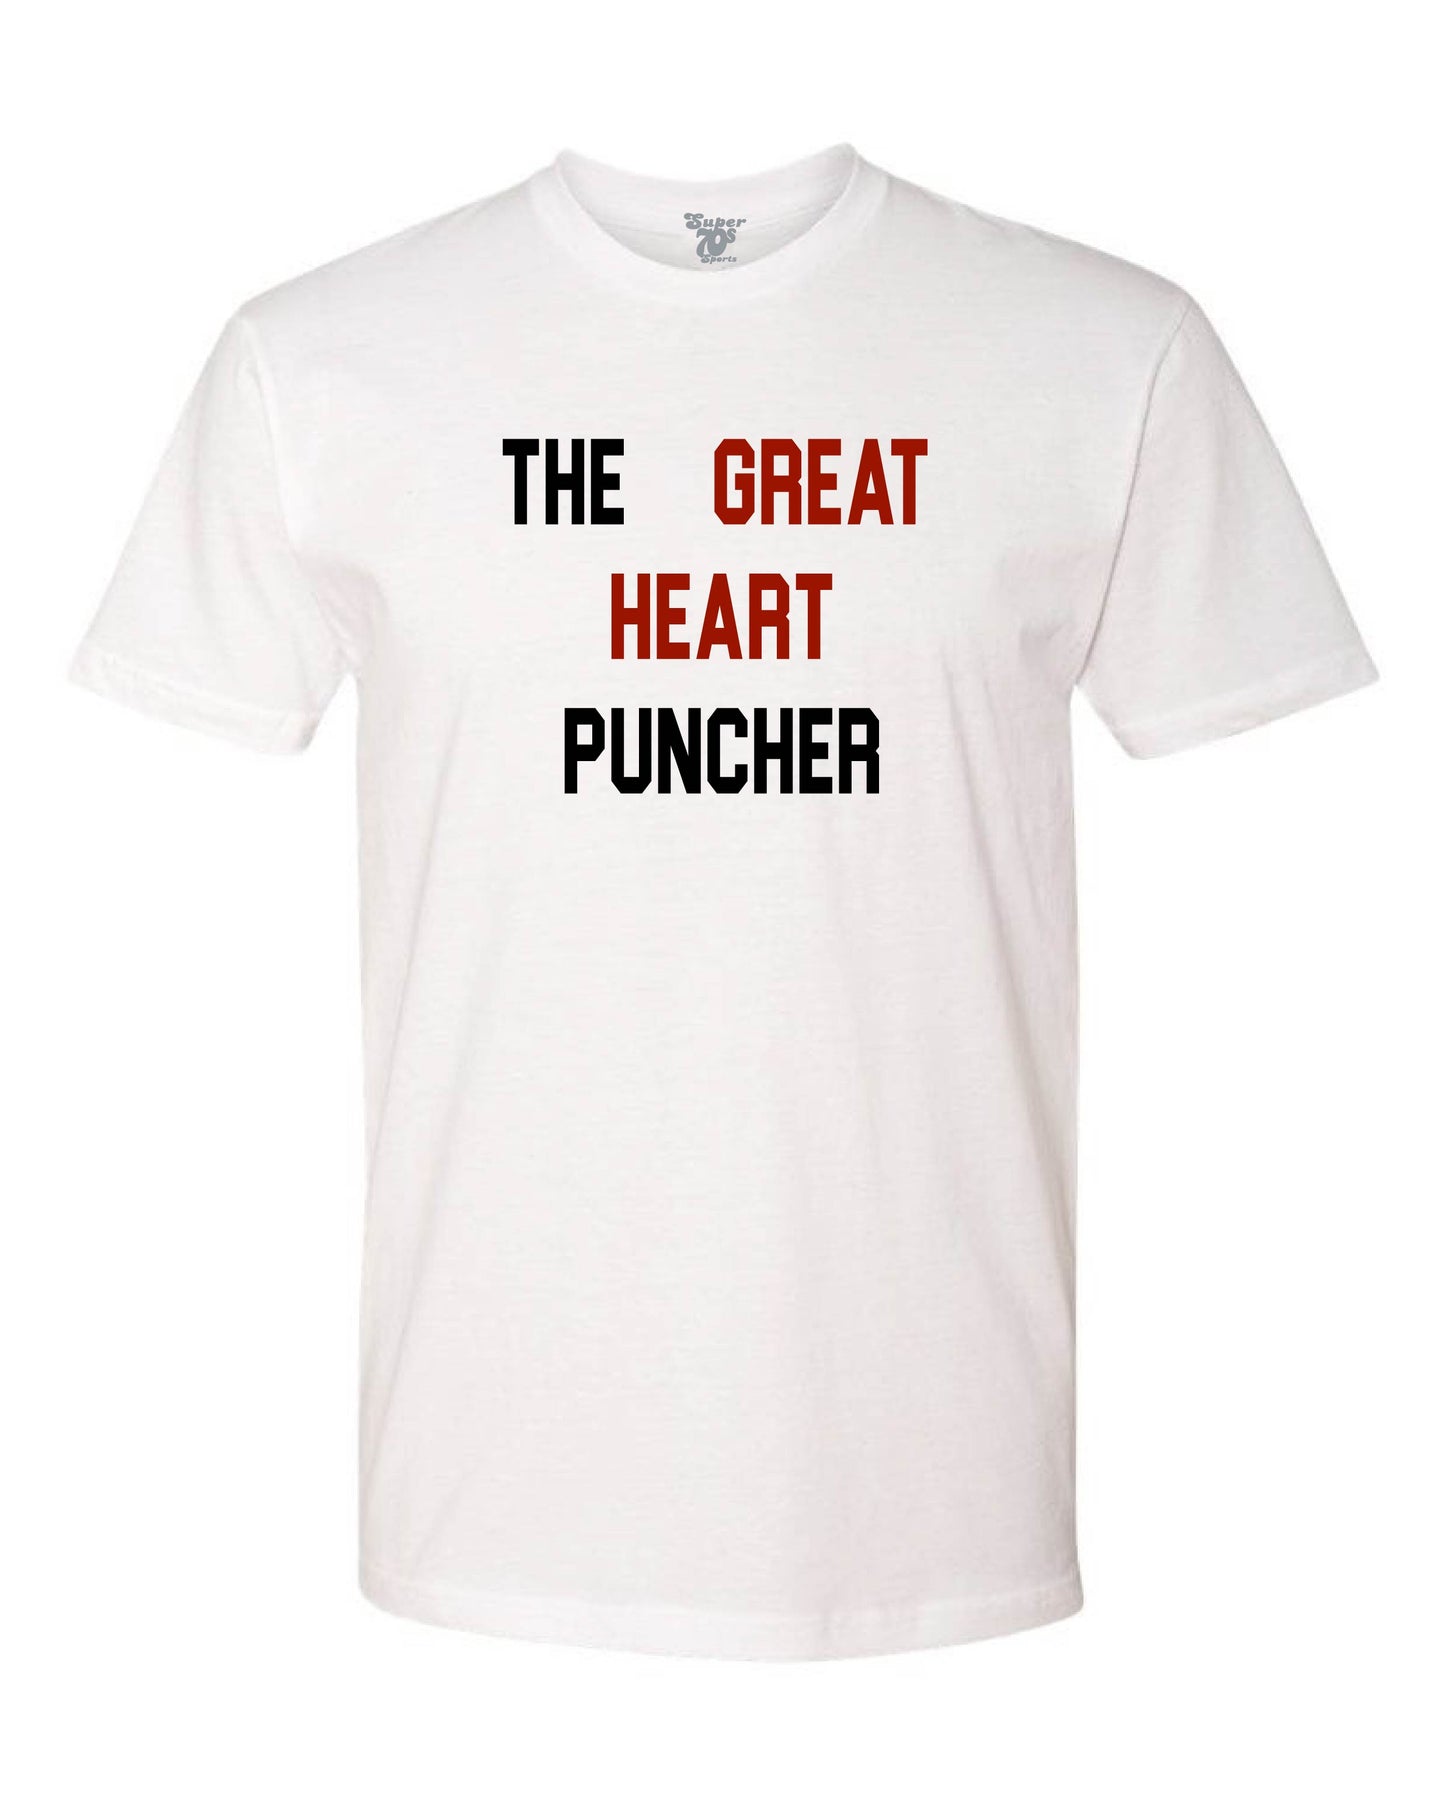 The Great Heart Puncher Tee